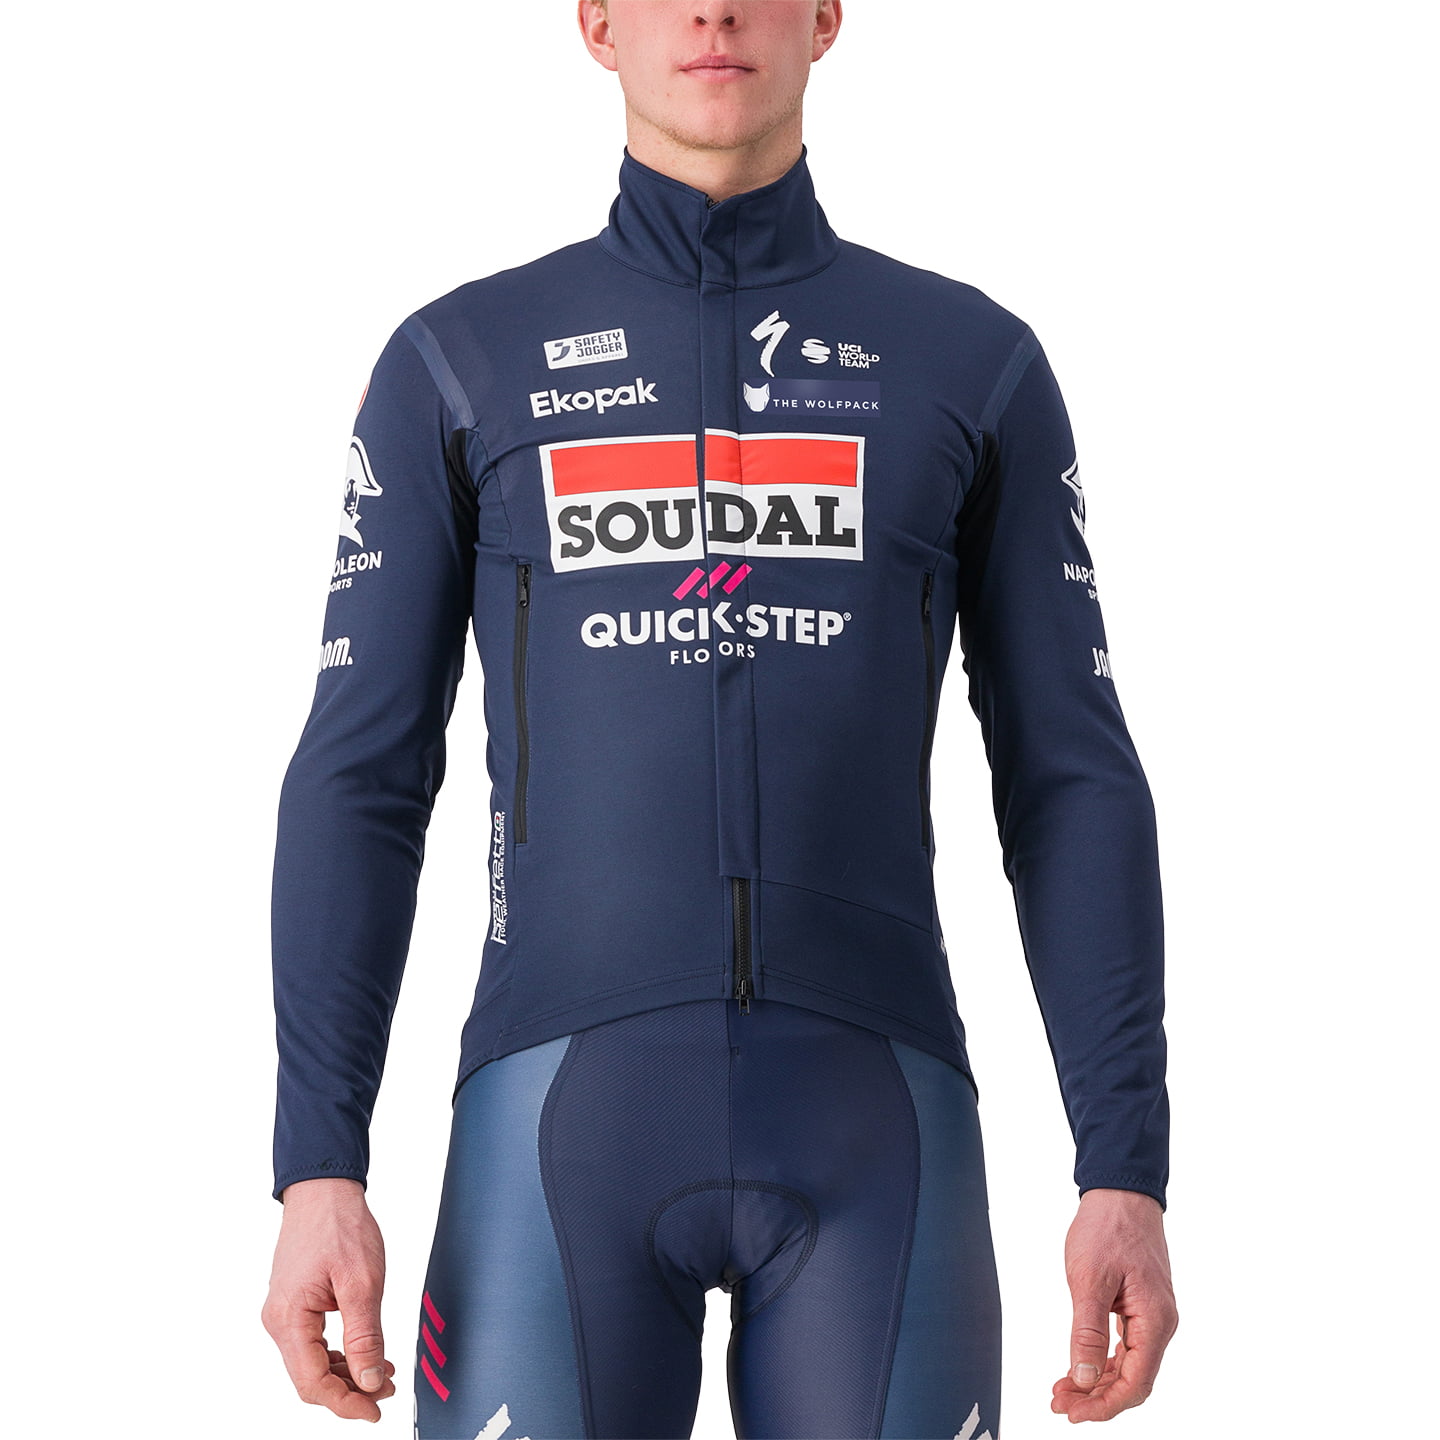 SOUDAL QUICK-STEP Perfetto 2024 Light Jacket, for men, size S, Cycle jacket, Cycling clothing